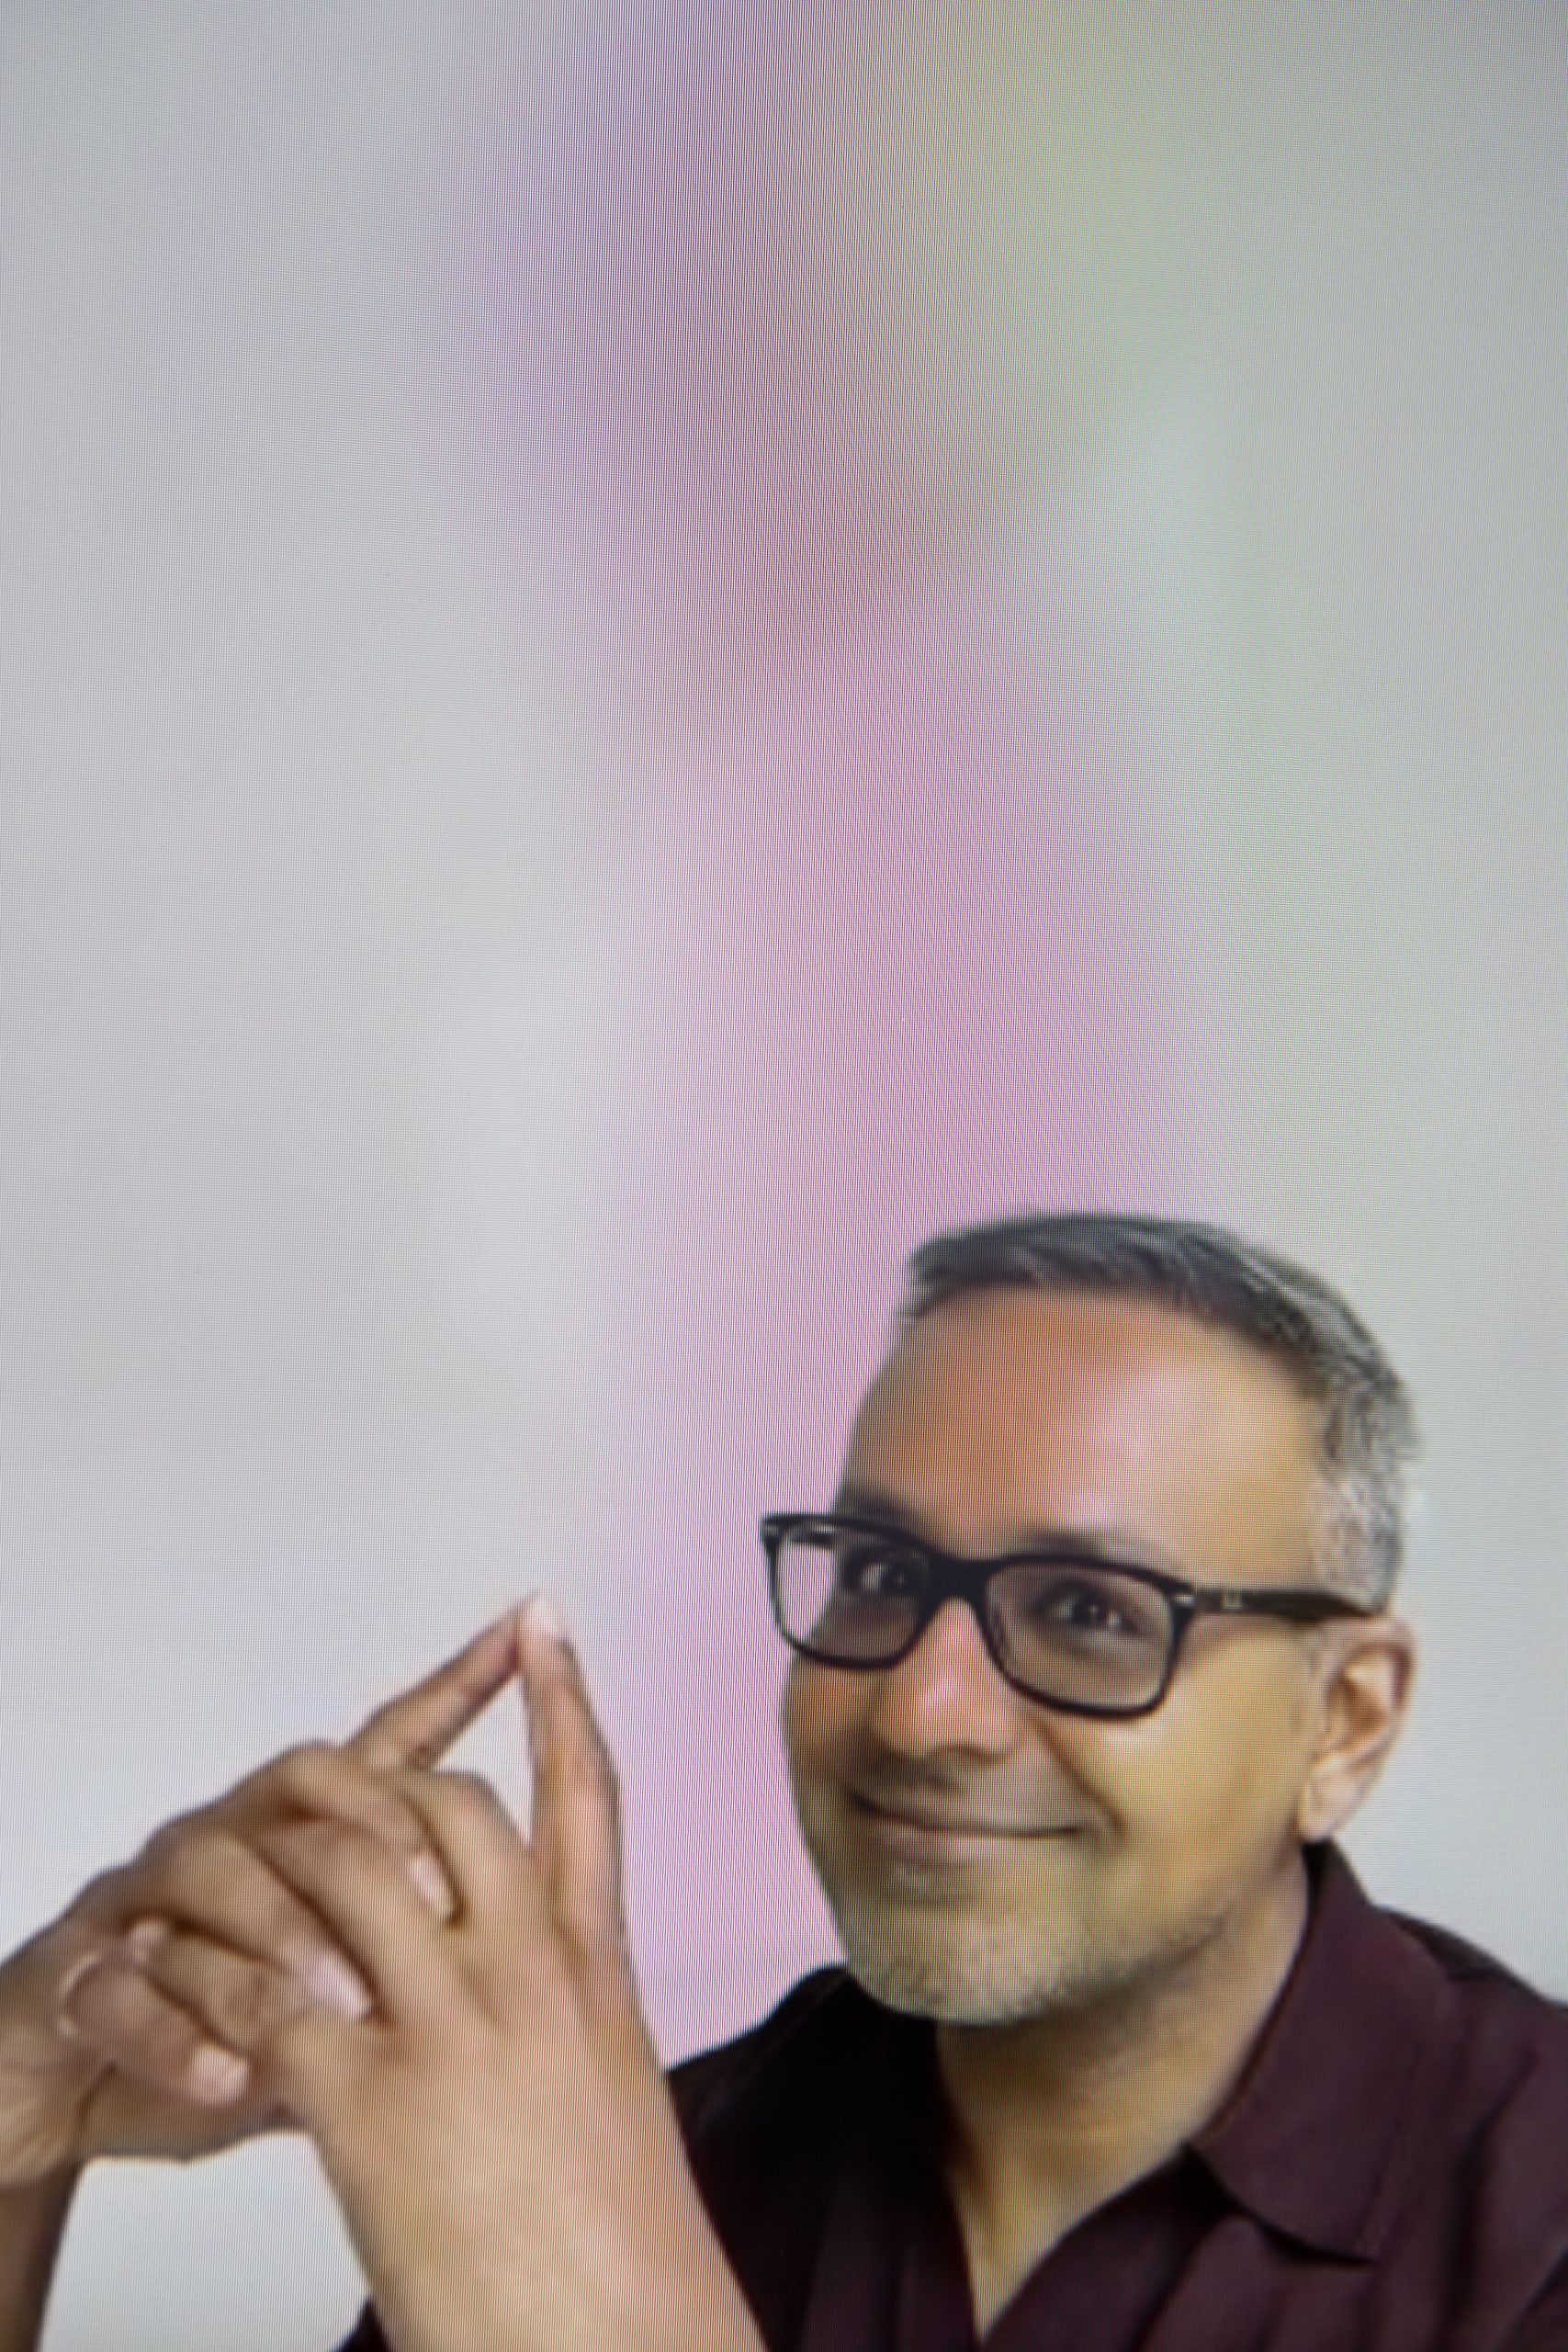 Samir Bhamra is visible from the chest up, in the bottom third of the portrait image. He wears a burgundy shirt and black glasses. He is an asian man with short grey hair and smiles as he looks into the camera. His arms are in front of his face, to the left and his hands are together, with his index fingers touching to make a triangle.